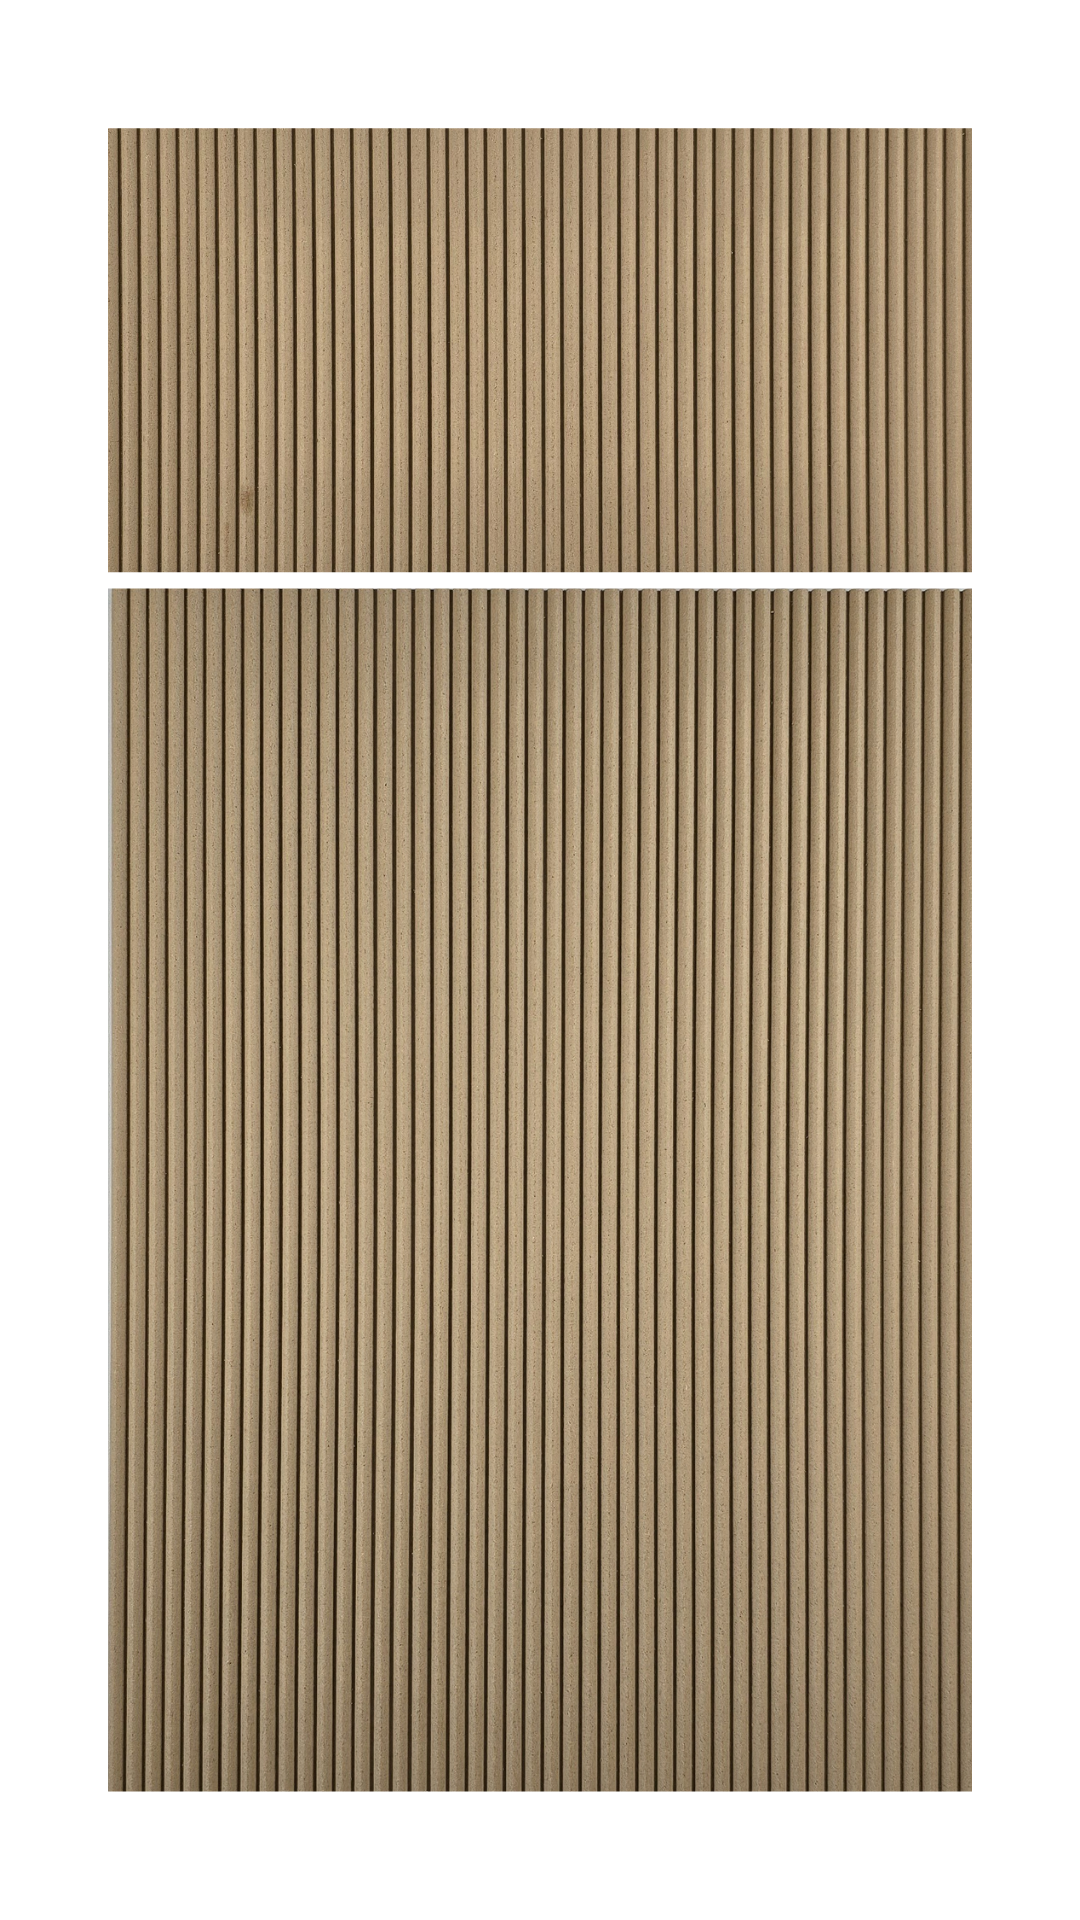 The Corduroy cabinet doors feature a 3/16th inch reeded panel, making for a stunning look in any space.